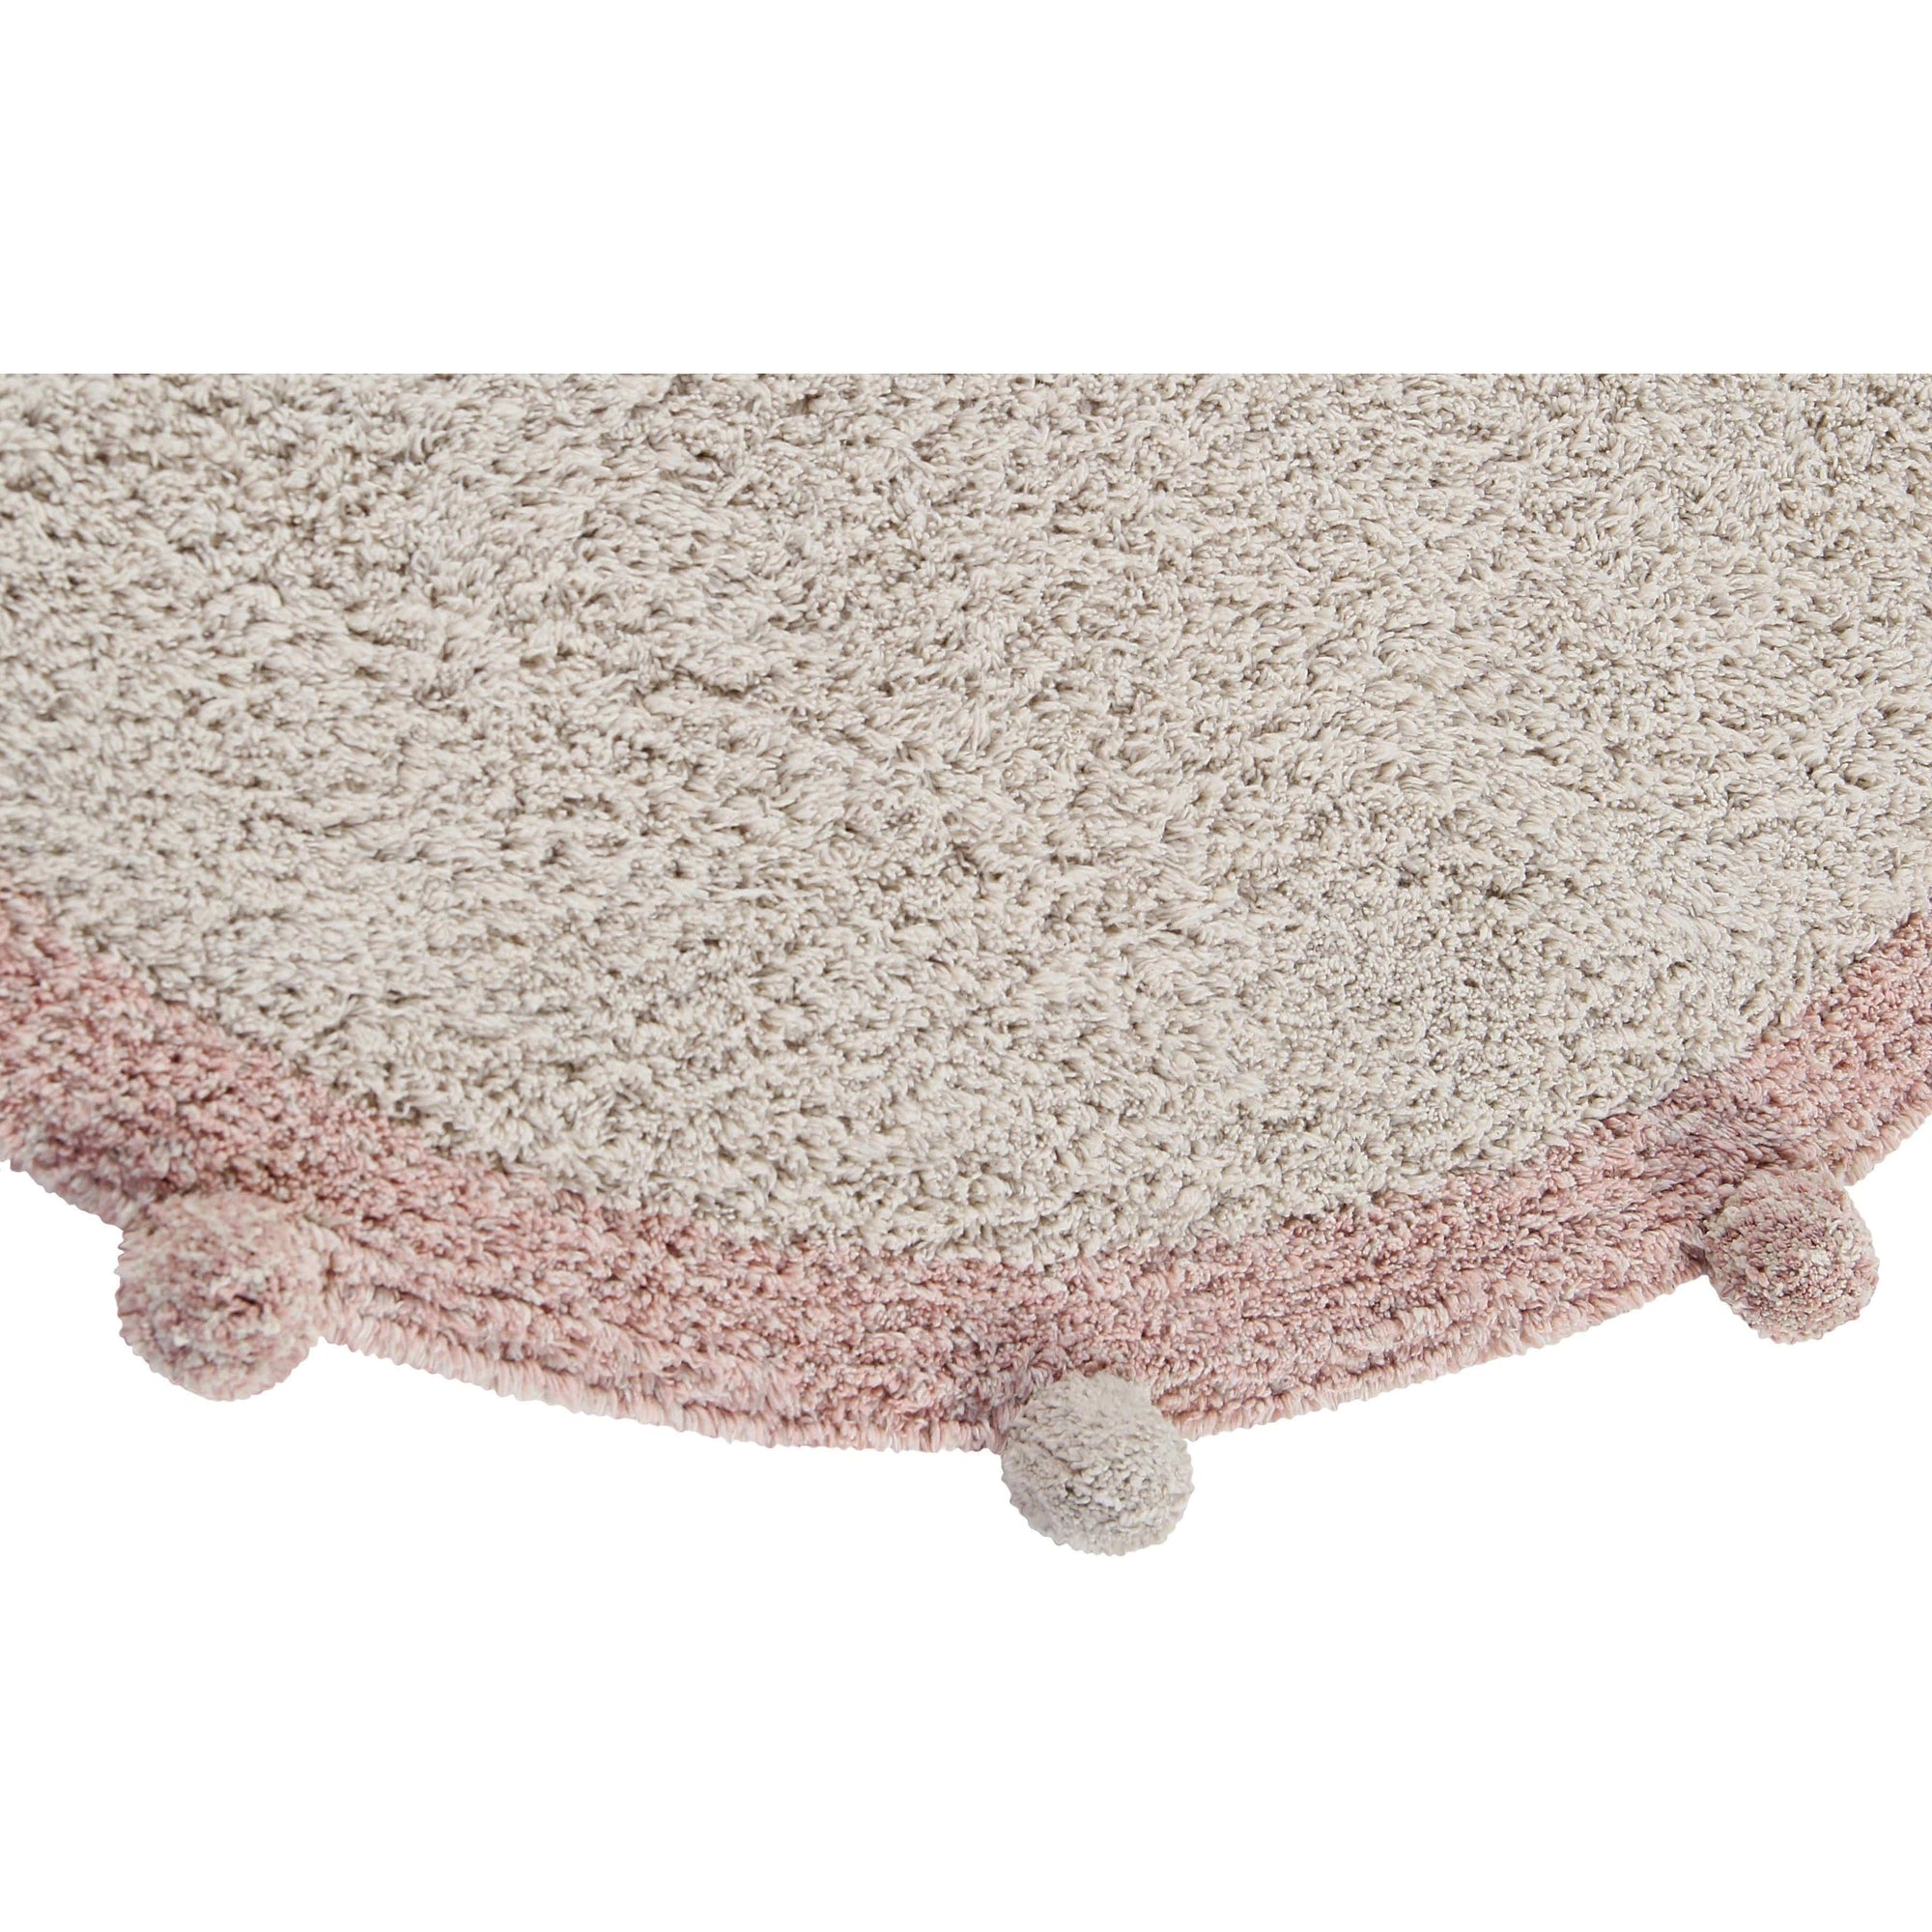 Rugs by Roo | Lorena Canals Bubbly Natural Vintage Nude Washable Area Rug-C-BUBBLY-VNU